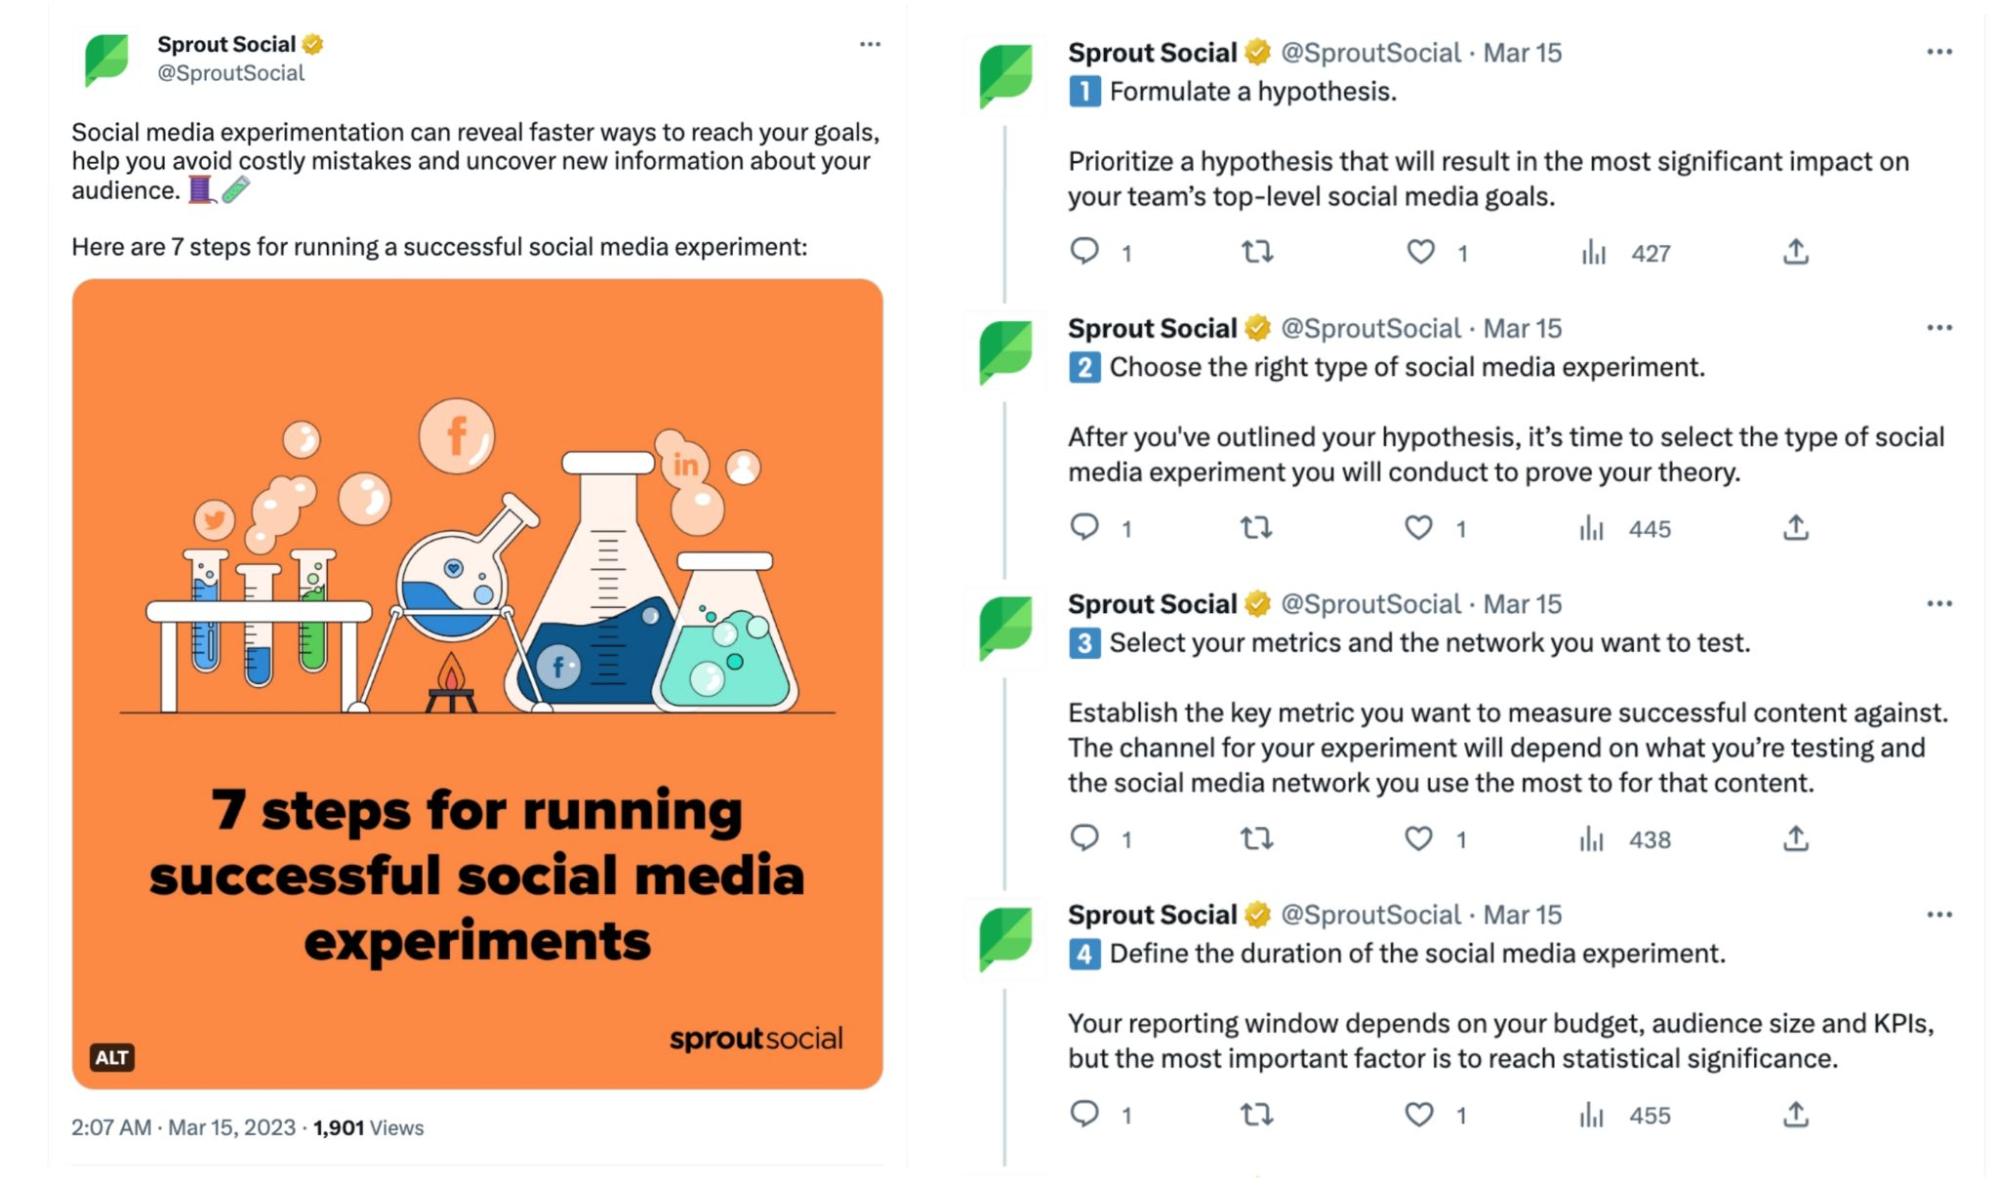 Side by side screenshots from Sprout Social of a Twitter thread that expands on the data points in an atricle being shared and reference.